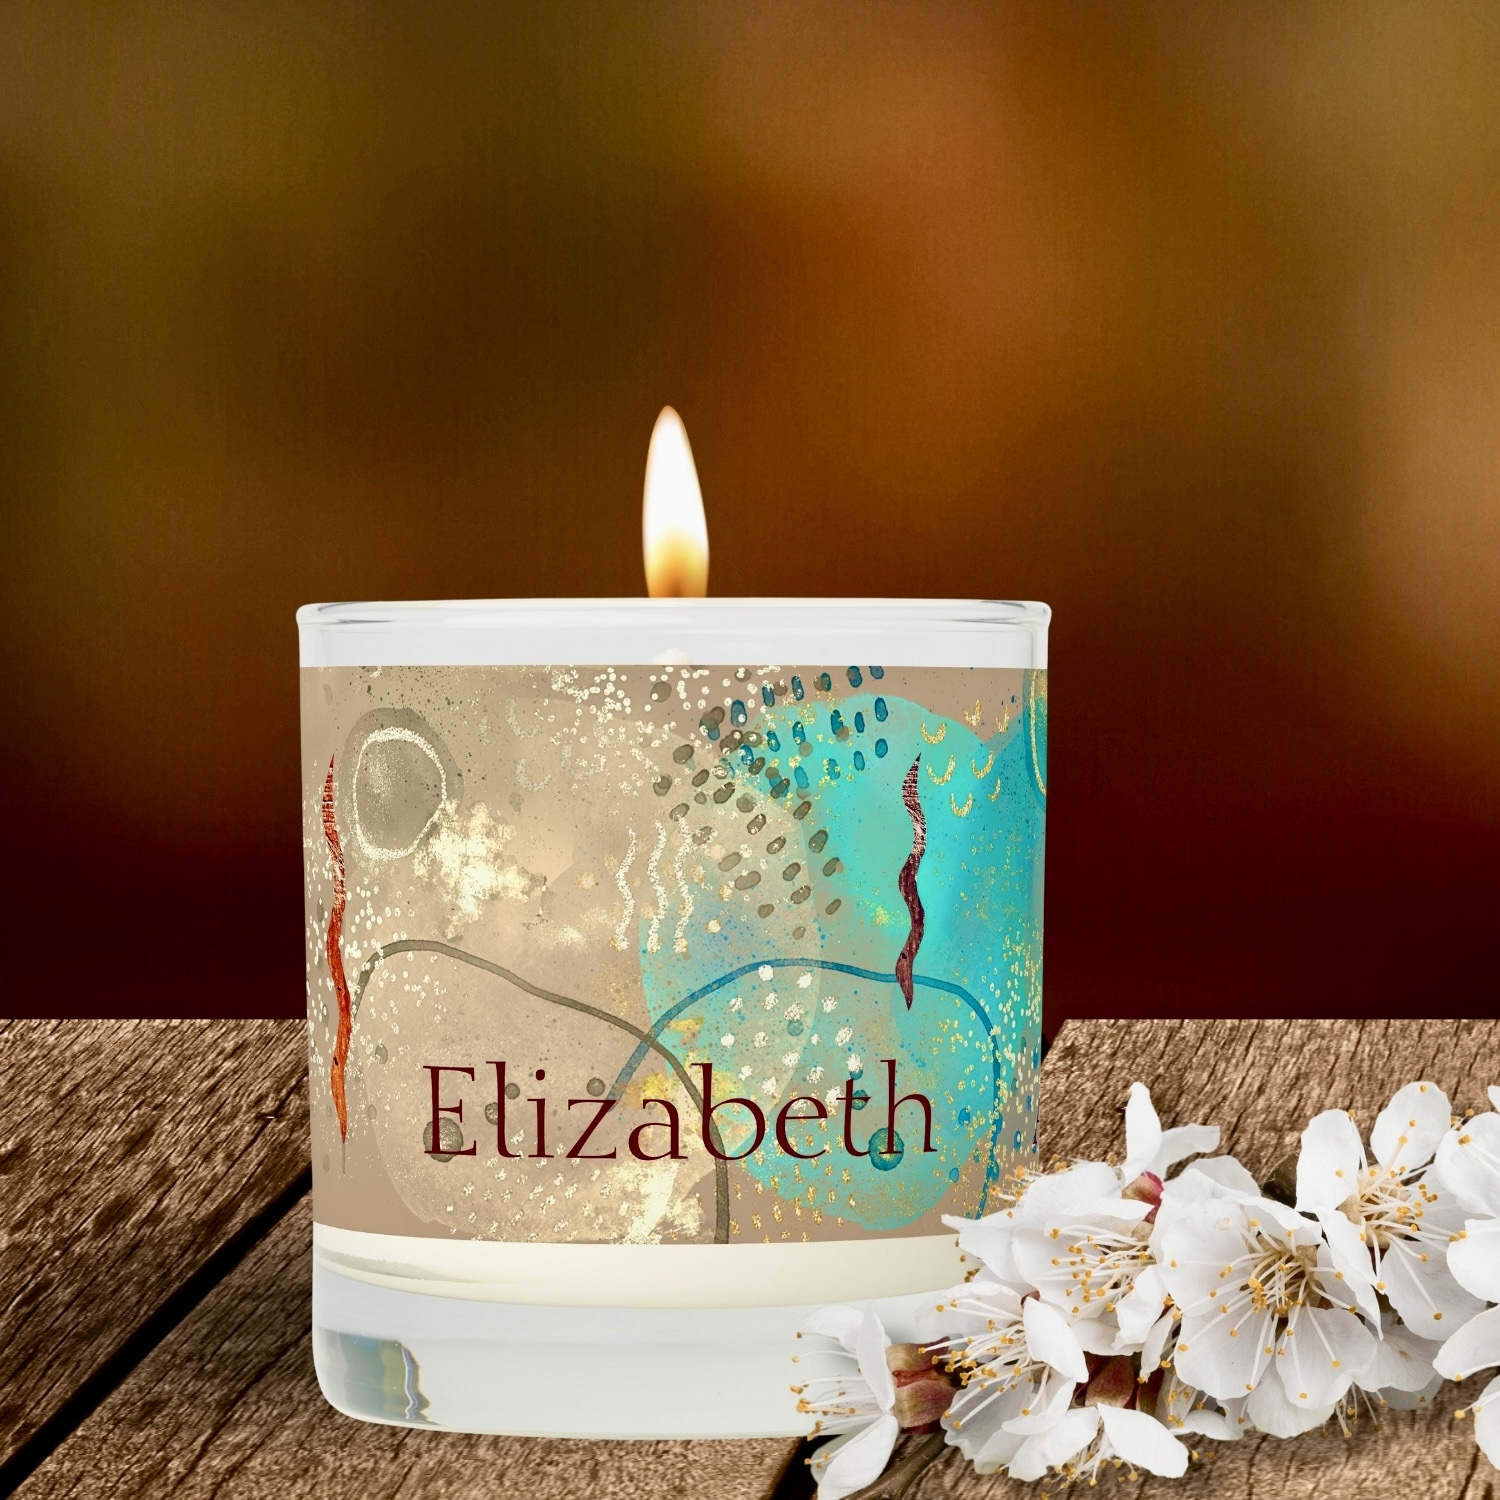 Turquoise Golden Scented Candle: Discover serenity with each flickering flame, echoing ancient wisdom.